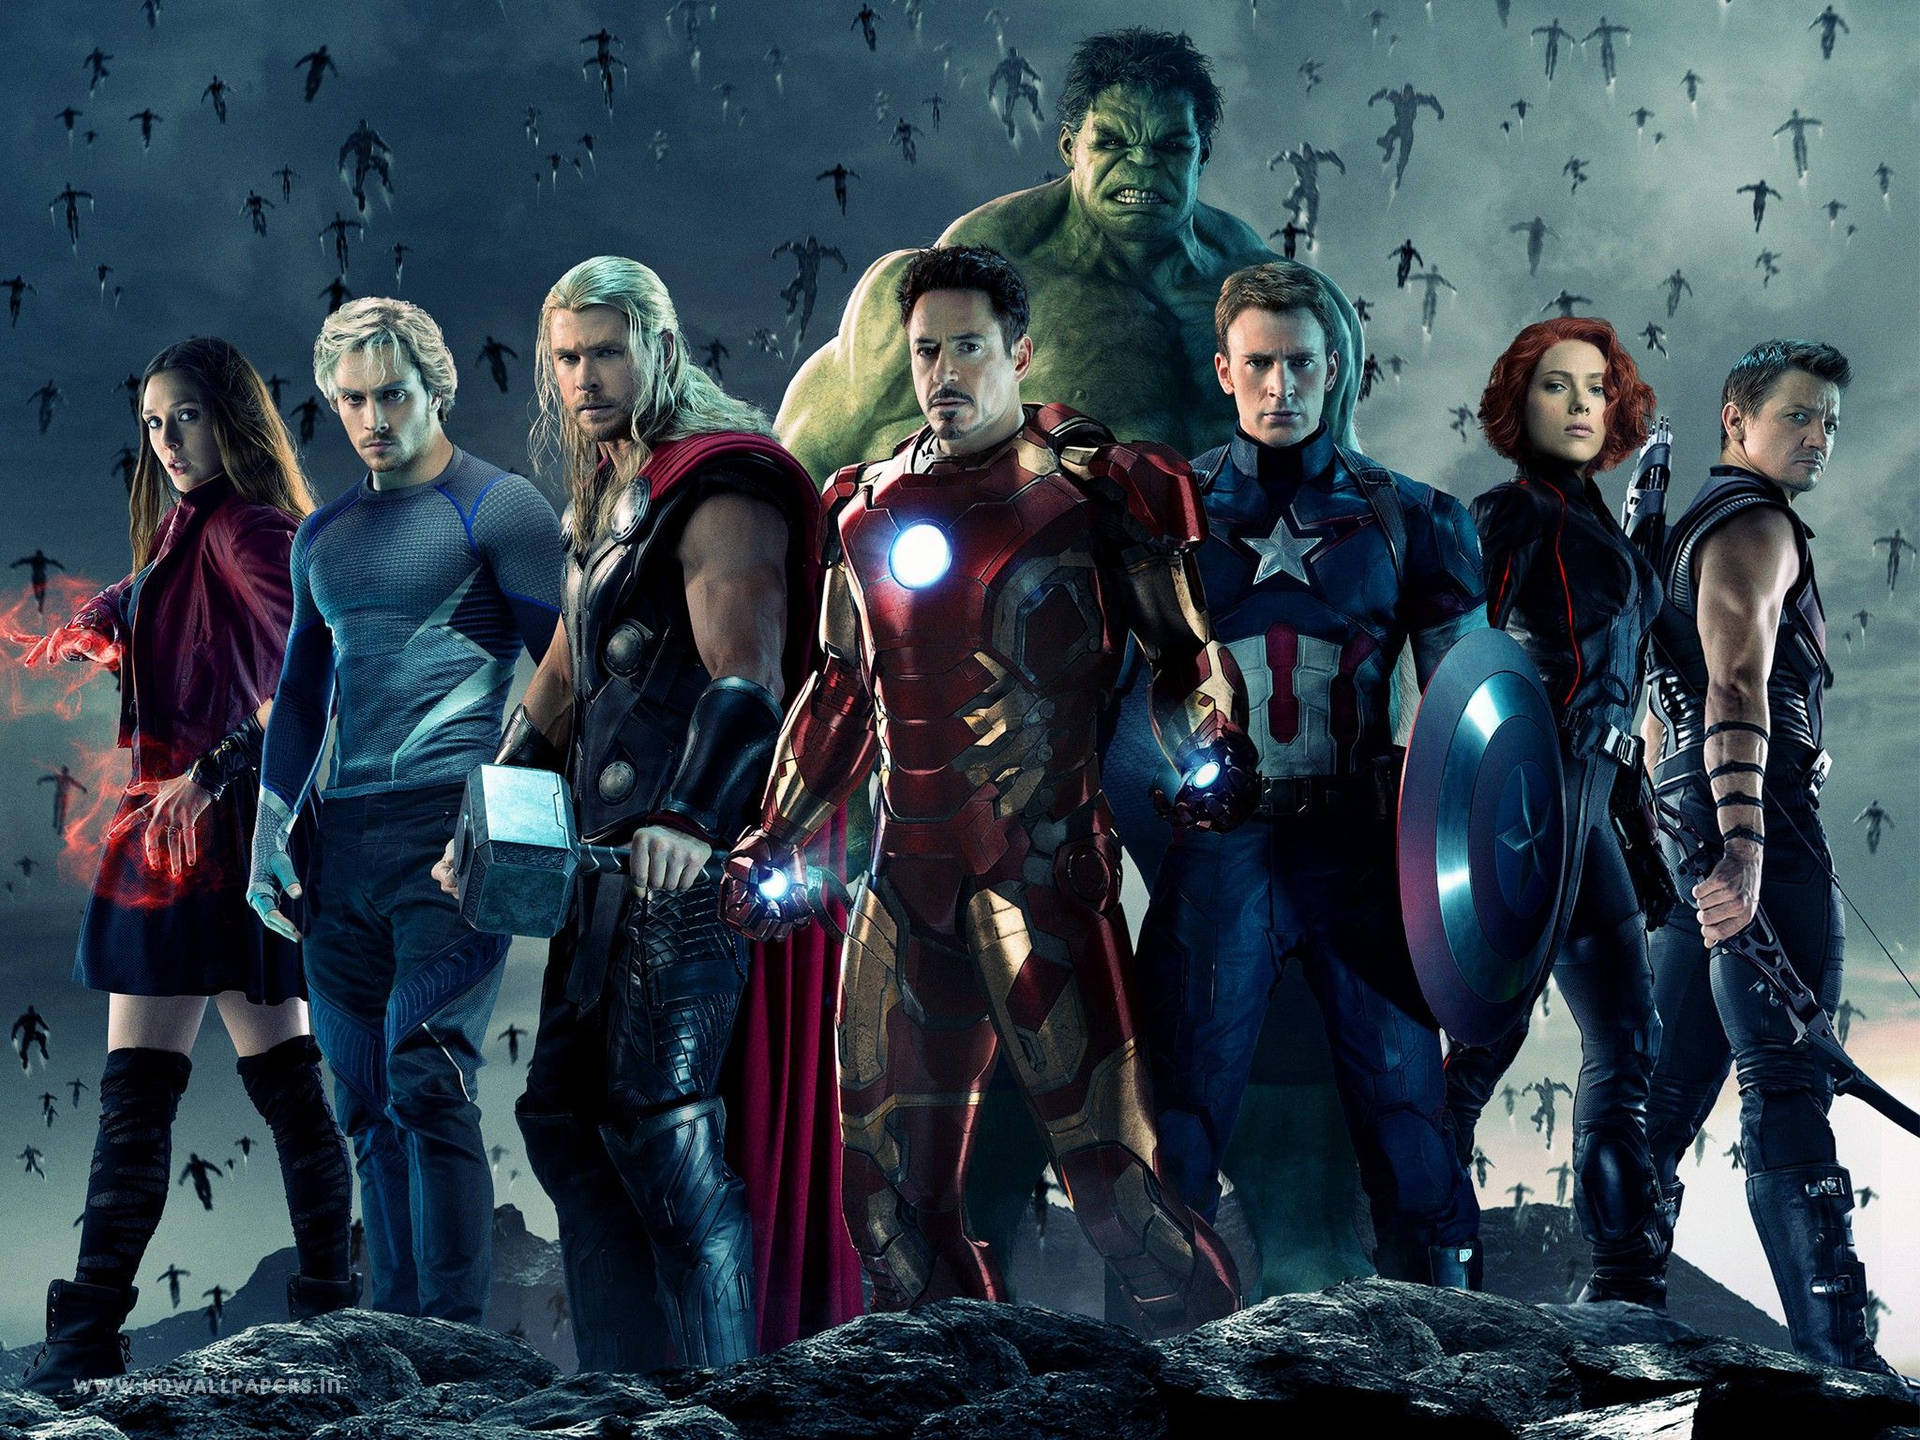 All The Superheroes of The Avengers in One Place Wallpaper